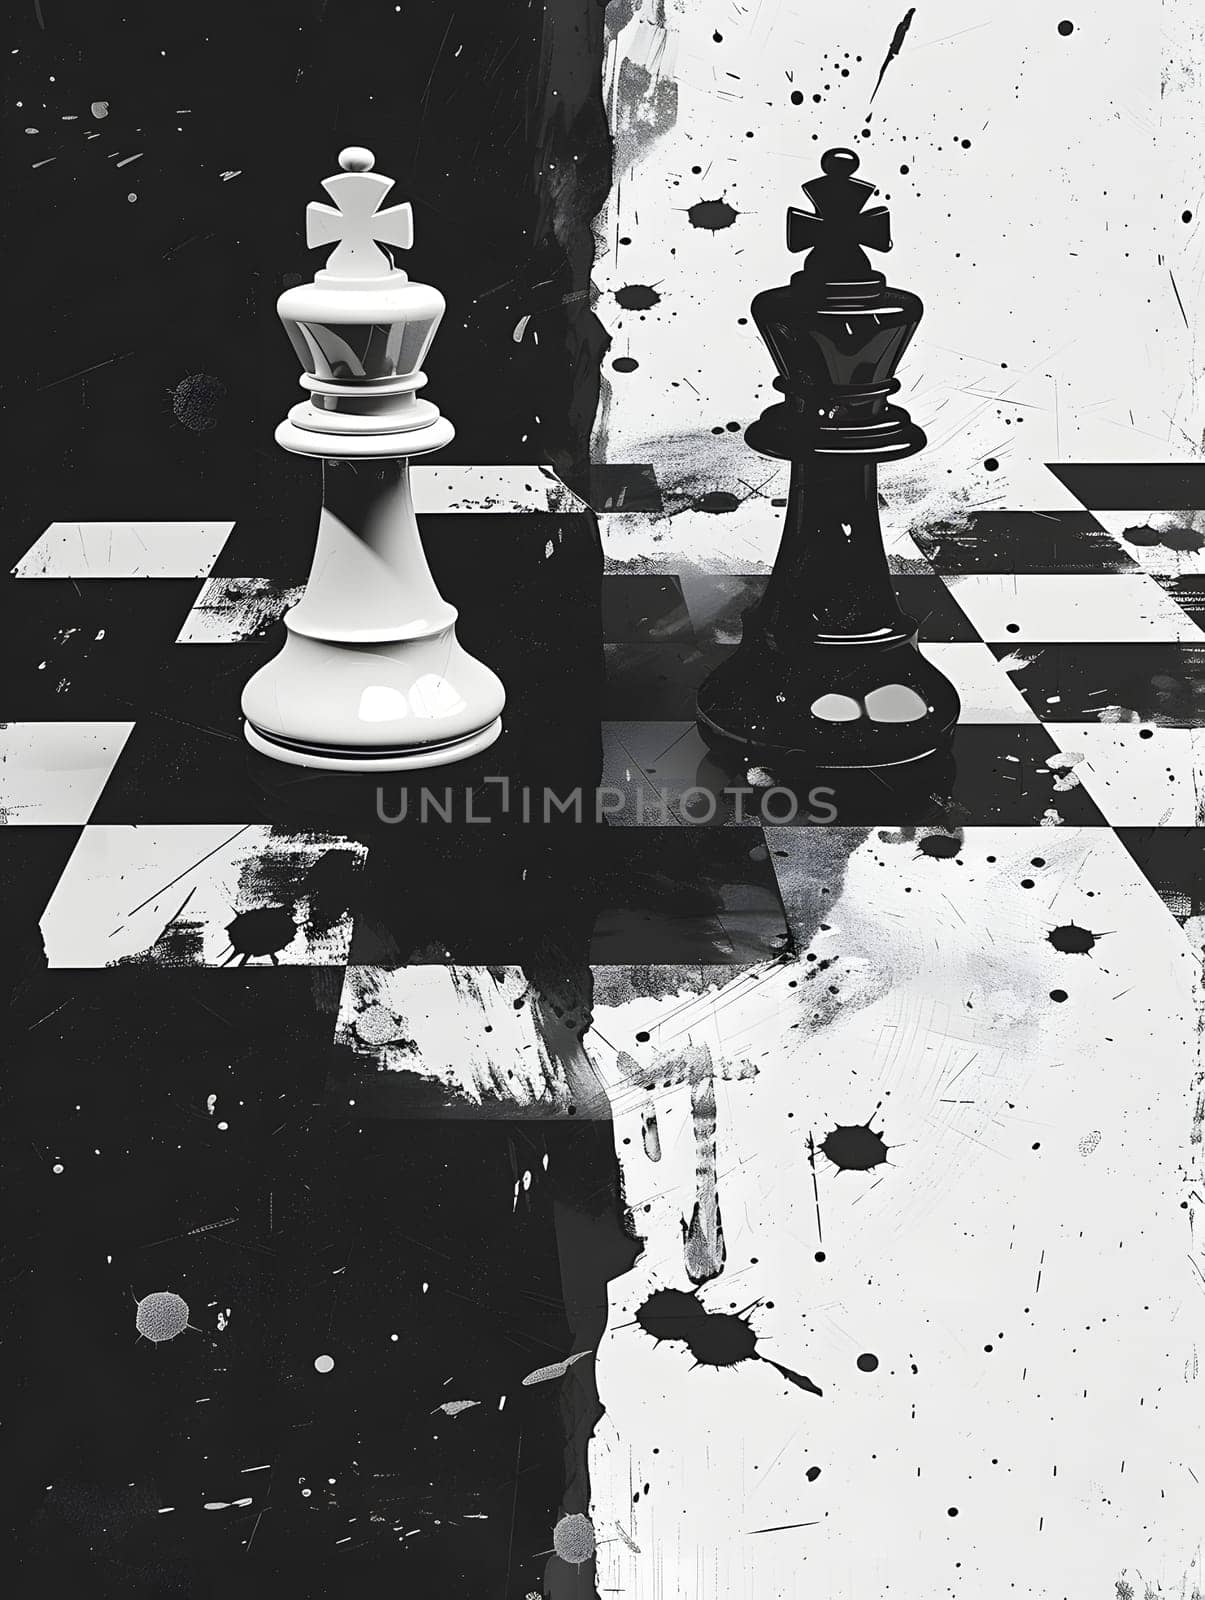 A monochrome photograph featuring two chess pieces on a board game, showcasing tints and shades in indoor recreation. A still life tabletop game captured in black and white stock photography